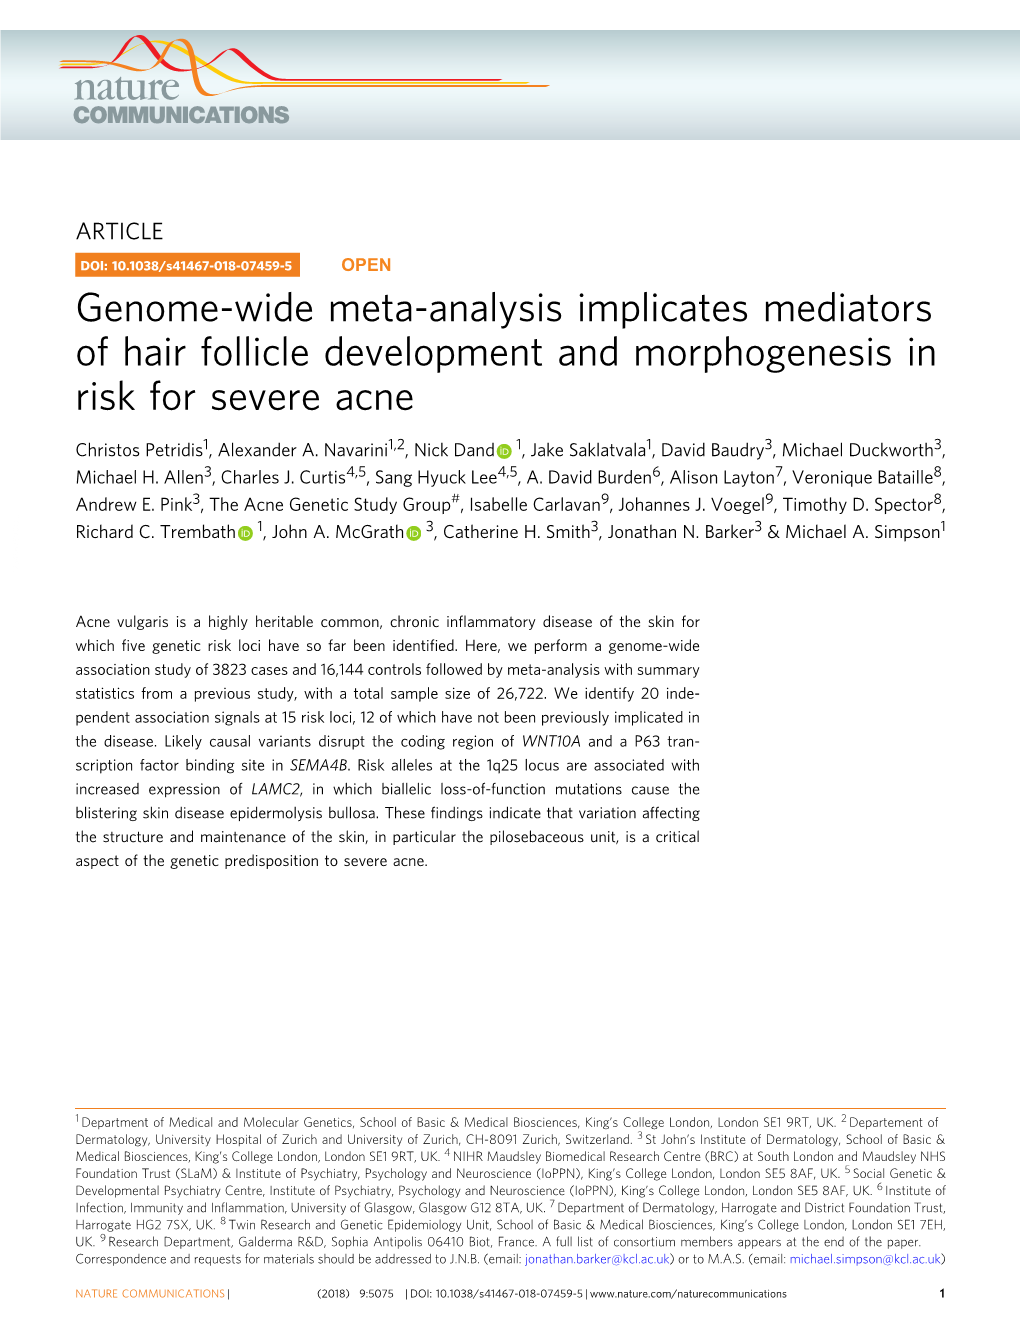 Genome-Wide Meta-Analysis Implicates Mediators of Hair Follicle Development and Morphogenesis in Risk for Severe Acne